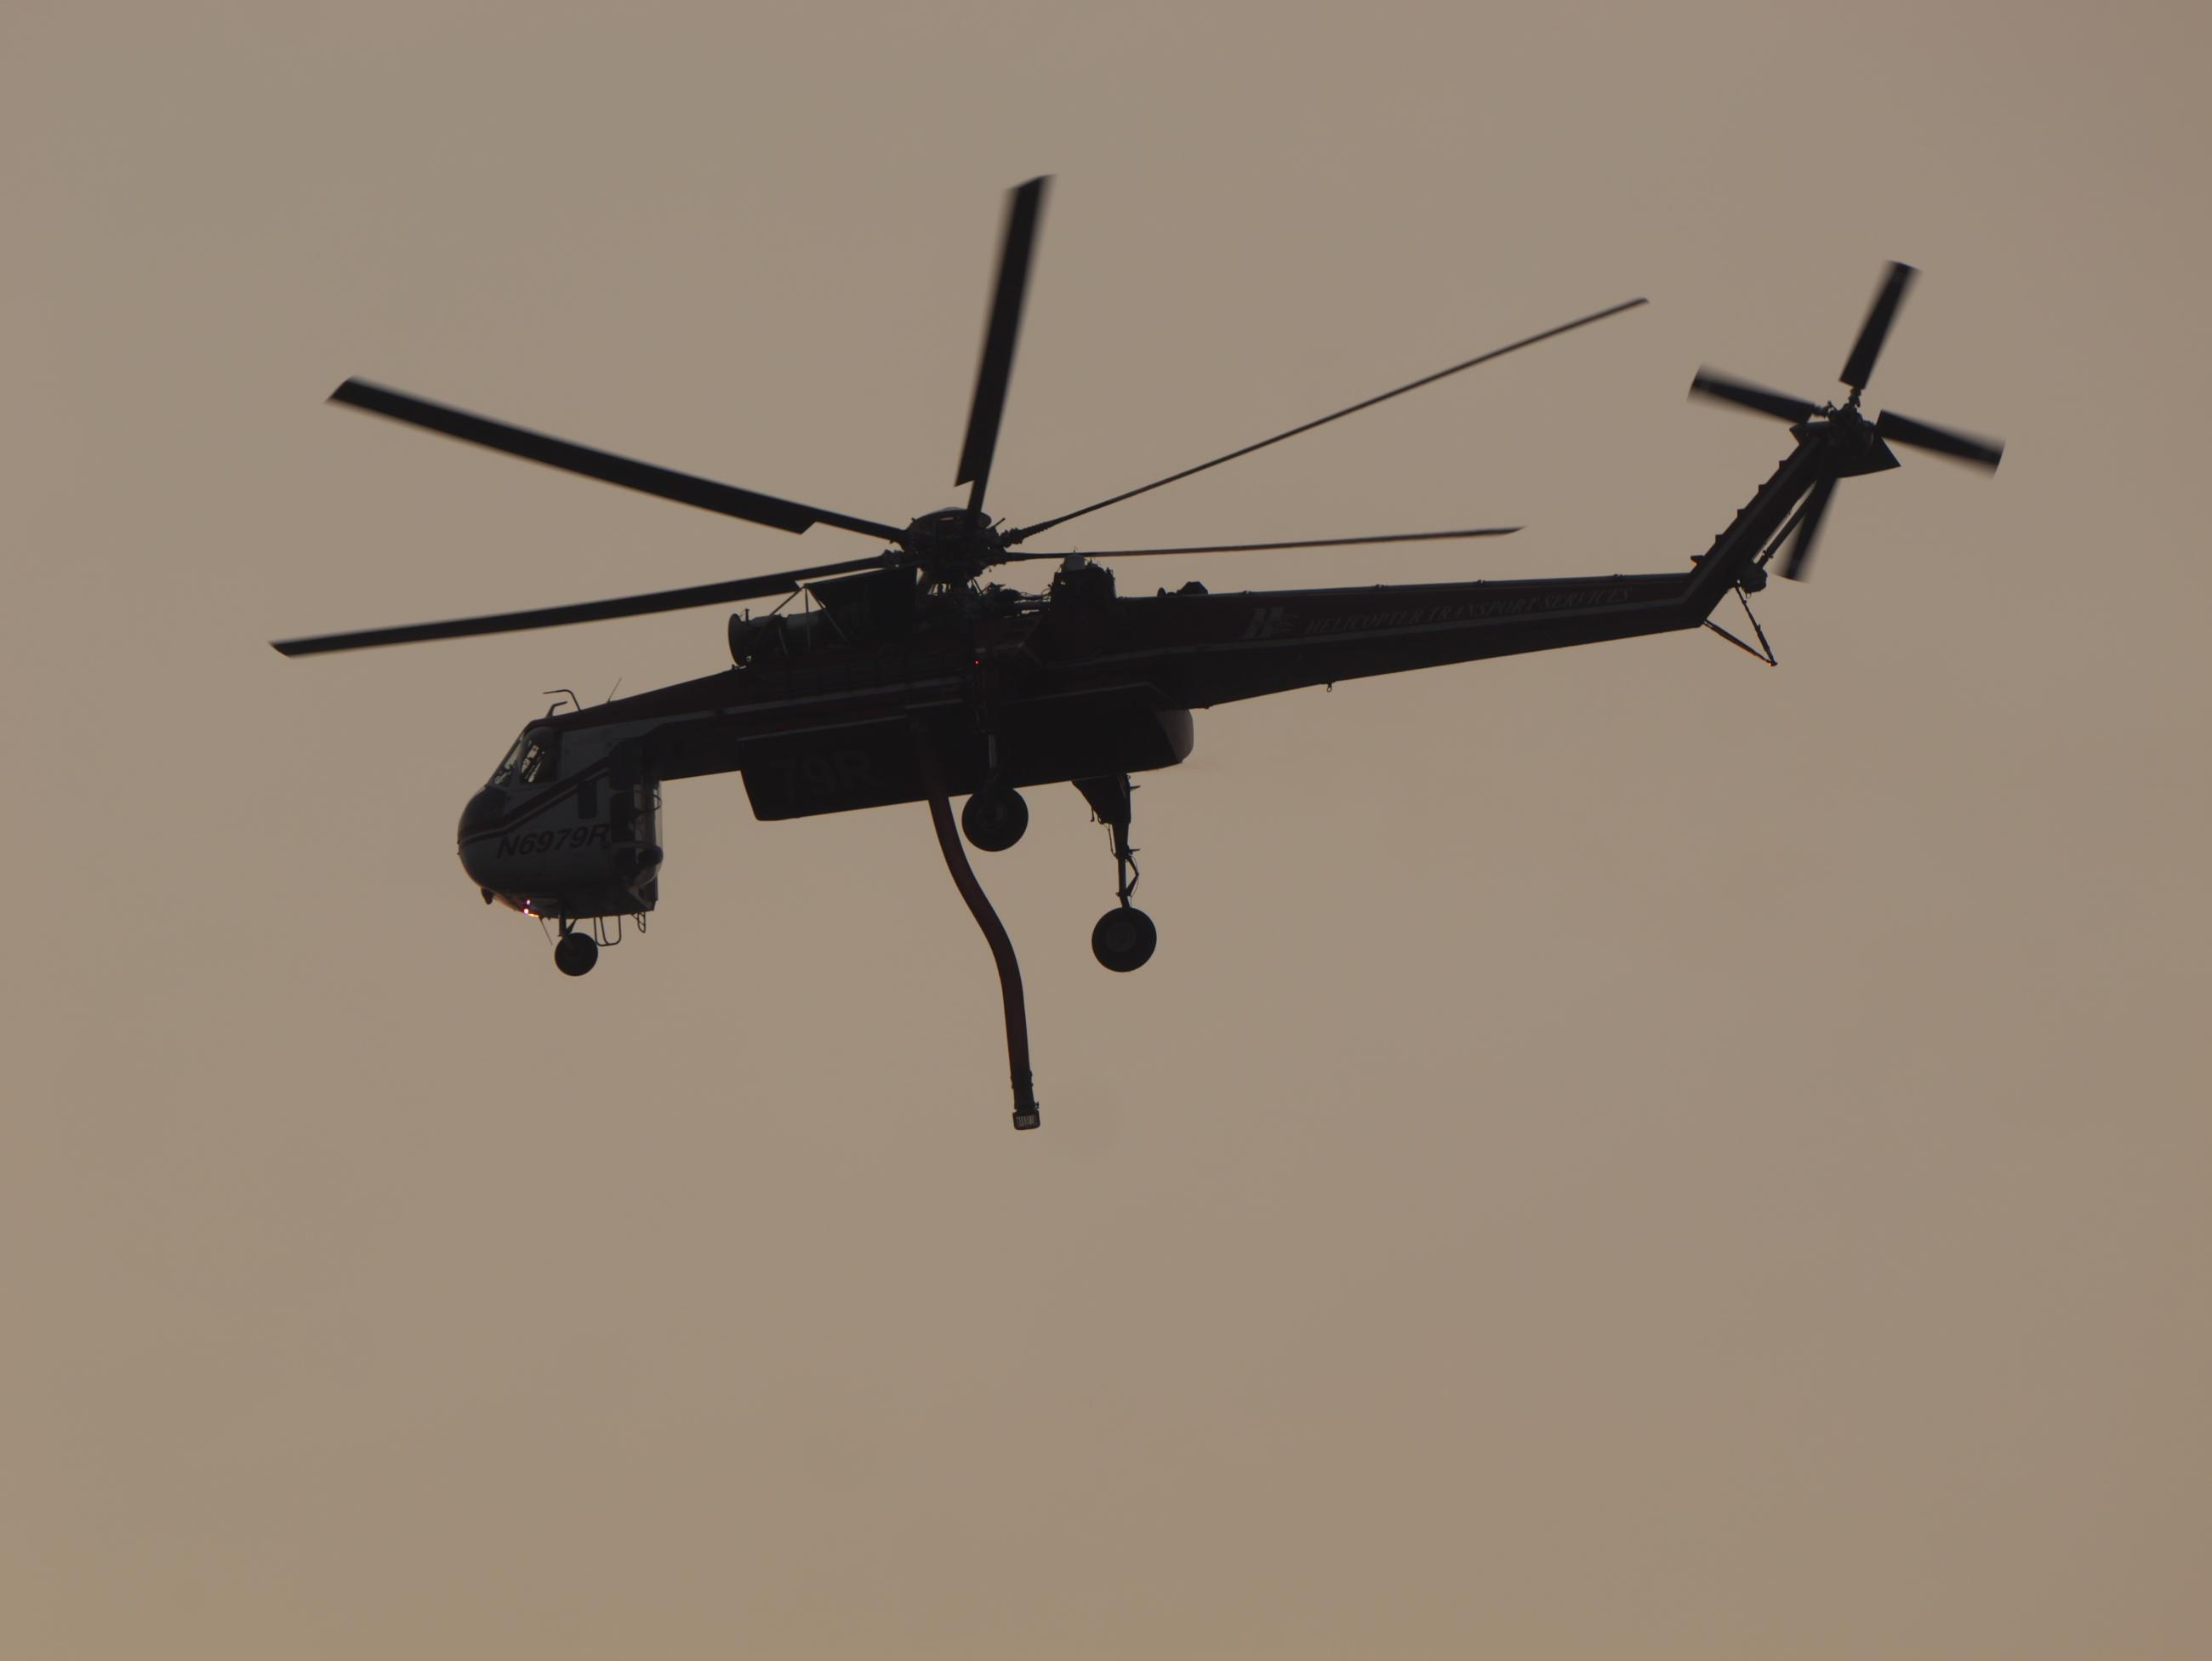 The silhouette of a helicopter with a dangling snorkle hose.